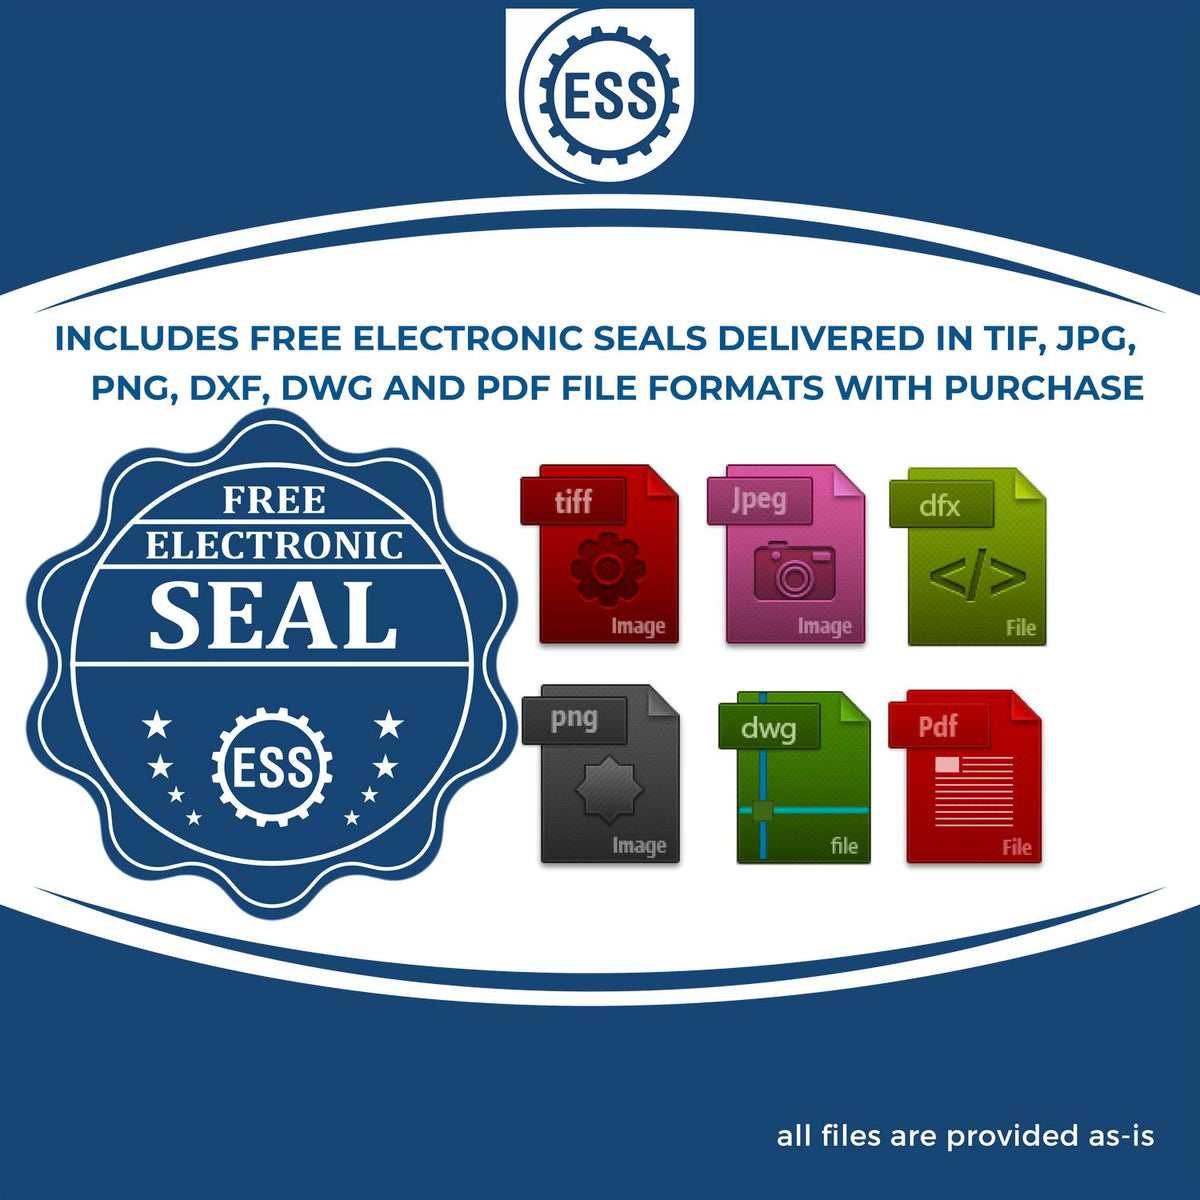 An infographic for the free electronic seal for the Massachusetts Professional Engineer Seal Stamp illustrating the different file type icons such as DXF, DWG, TIF, JPG and PNG.